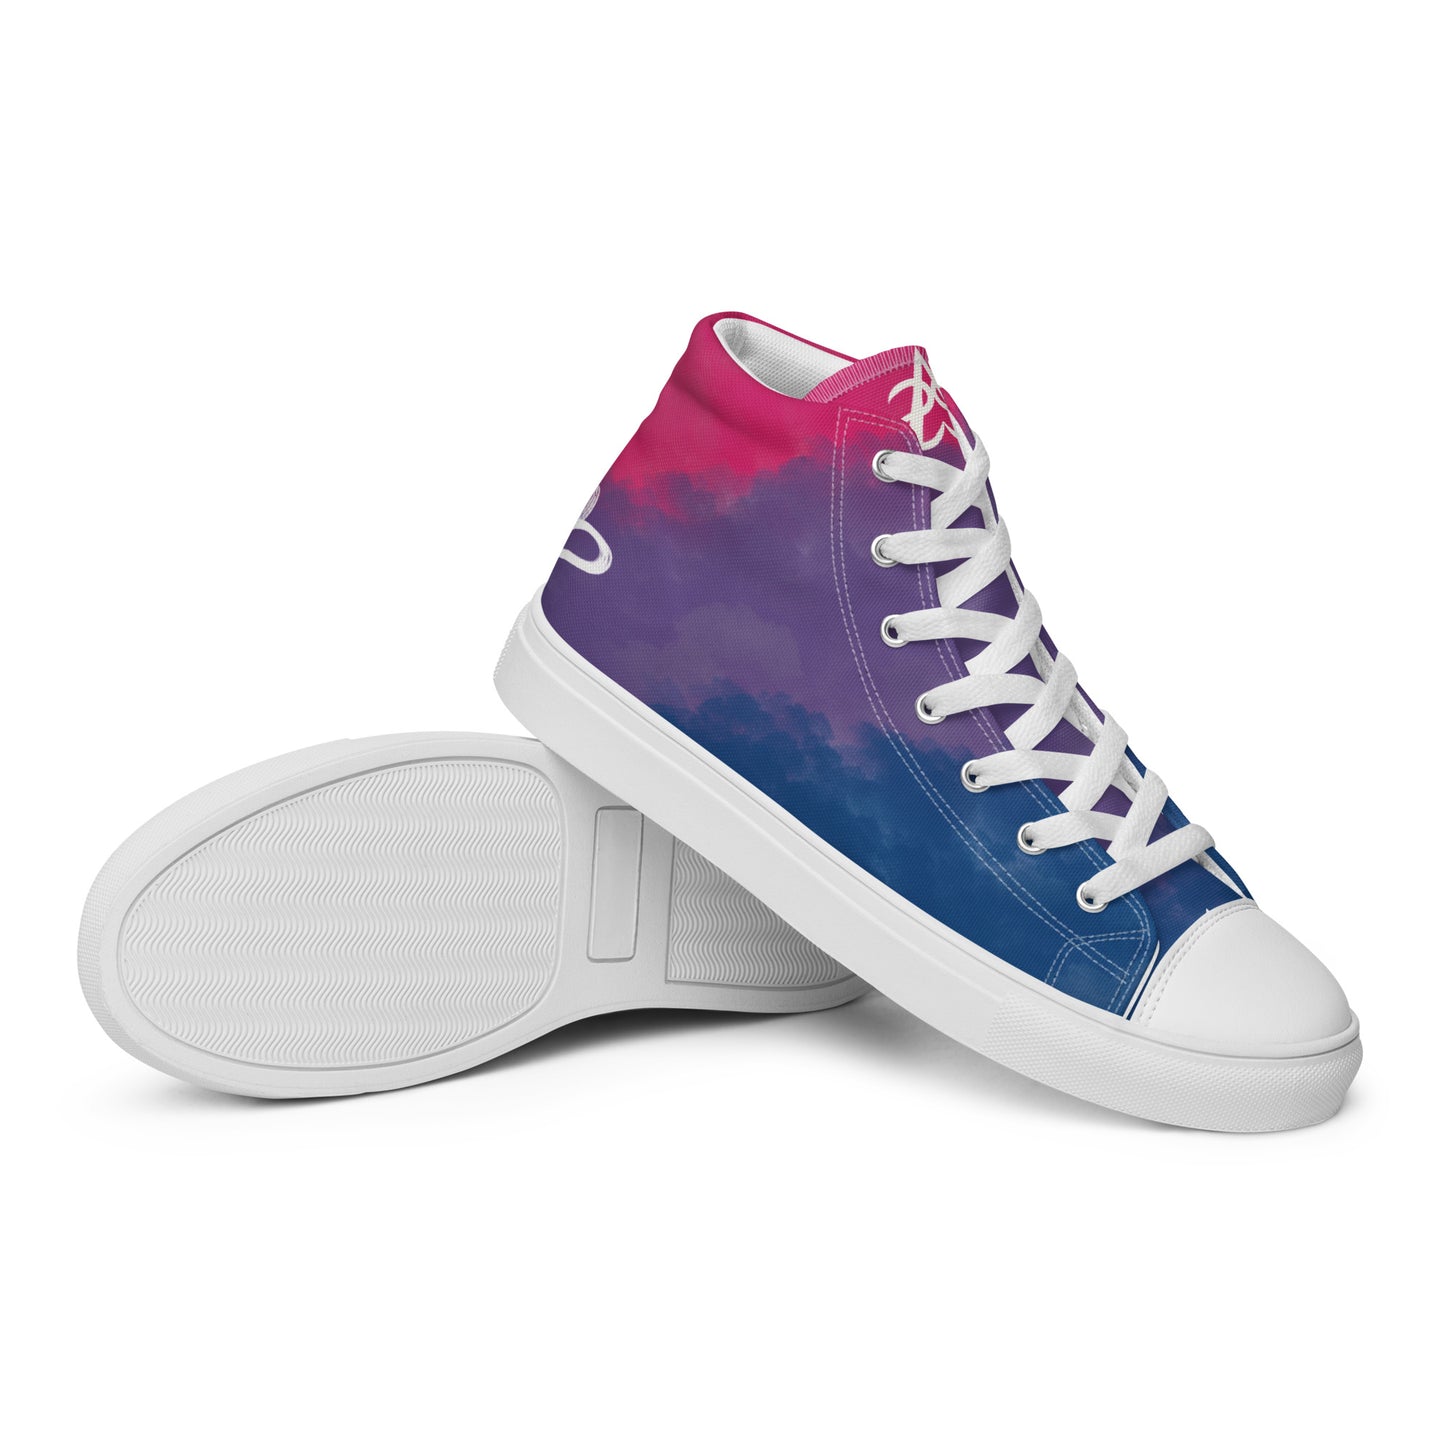 A pair of high top shoes with color block pink, purple, and blue clouds, a white hand drawn heart, and the Aras Sivad logo on the back.